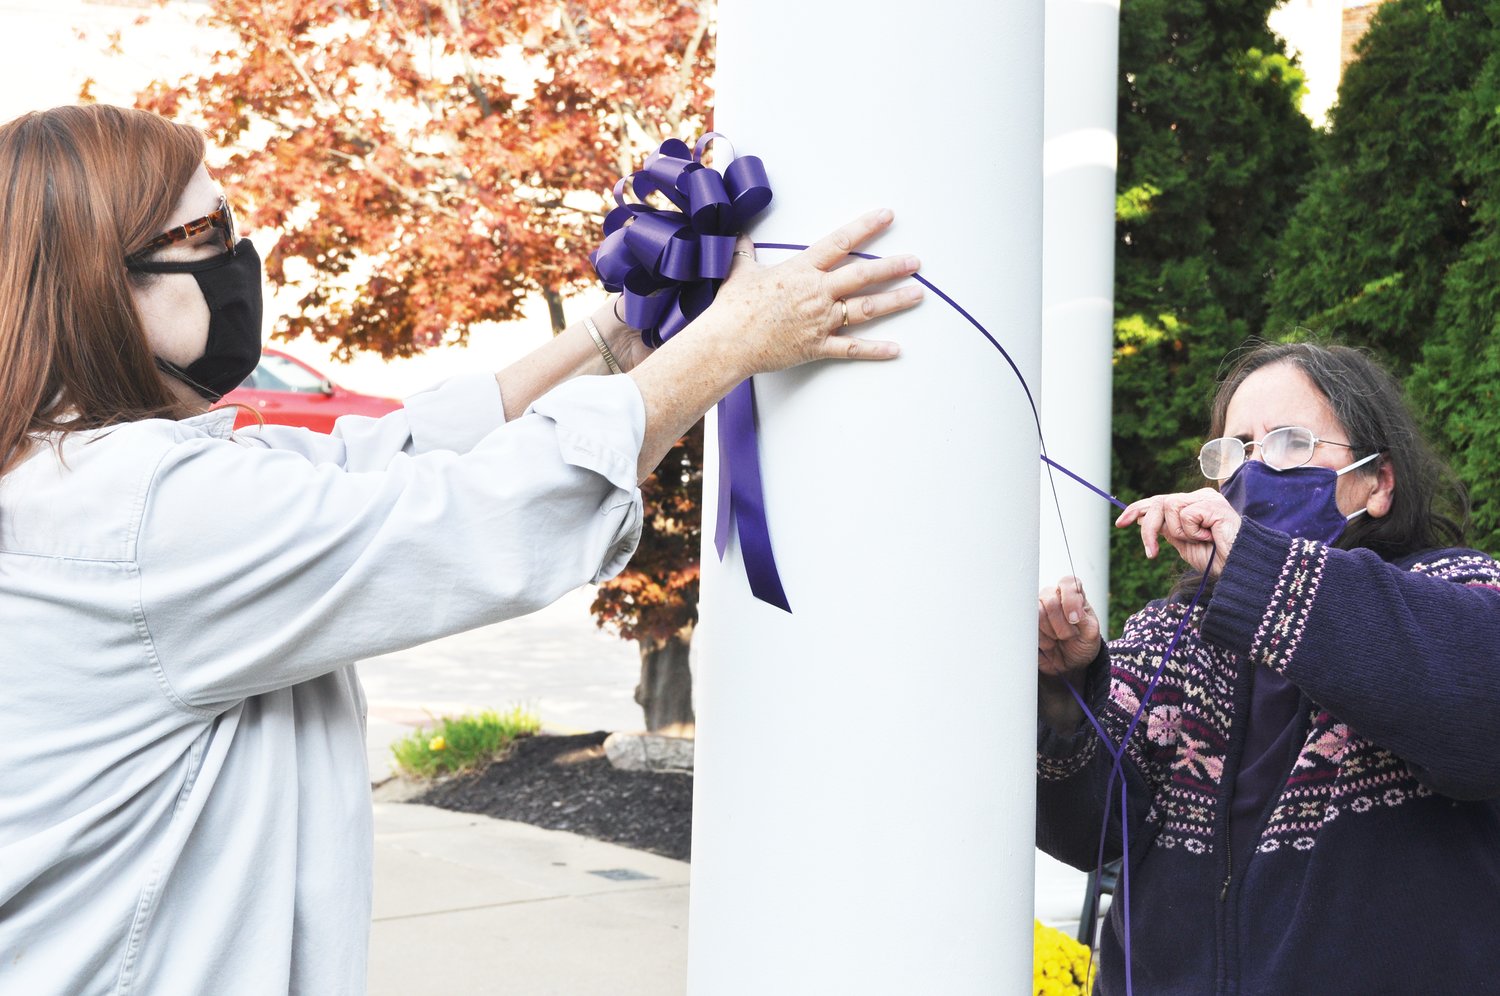 Deb Lee, left, and Kathy Walker, employees of the Family Crisis Shelter, tie a purple ribbon representing domestic violence awareness at Marie Canine Plaza Tuesday. October is Domestic Violence Awareness Month.